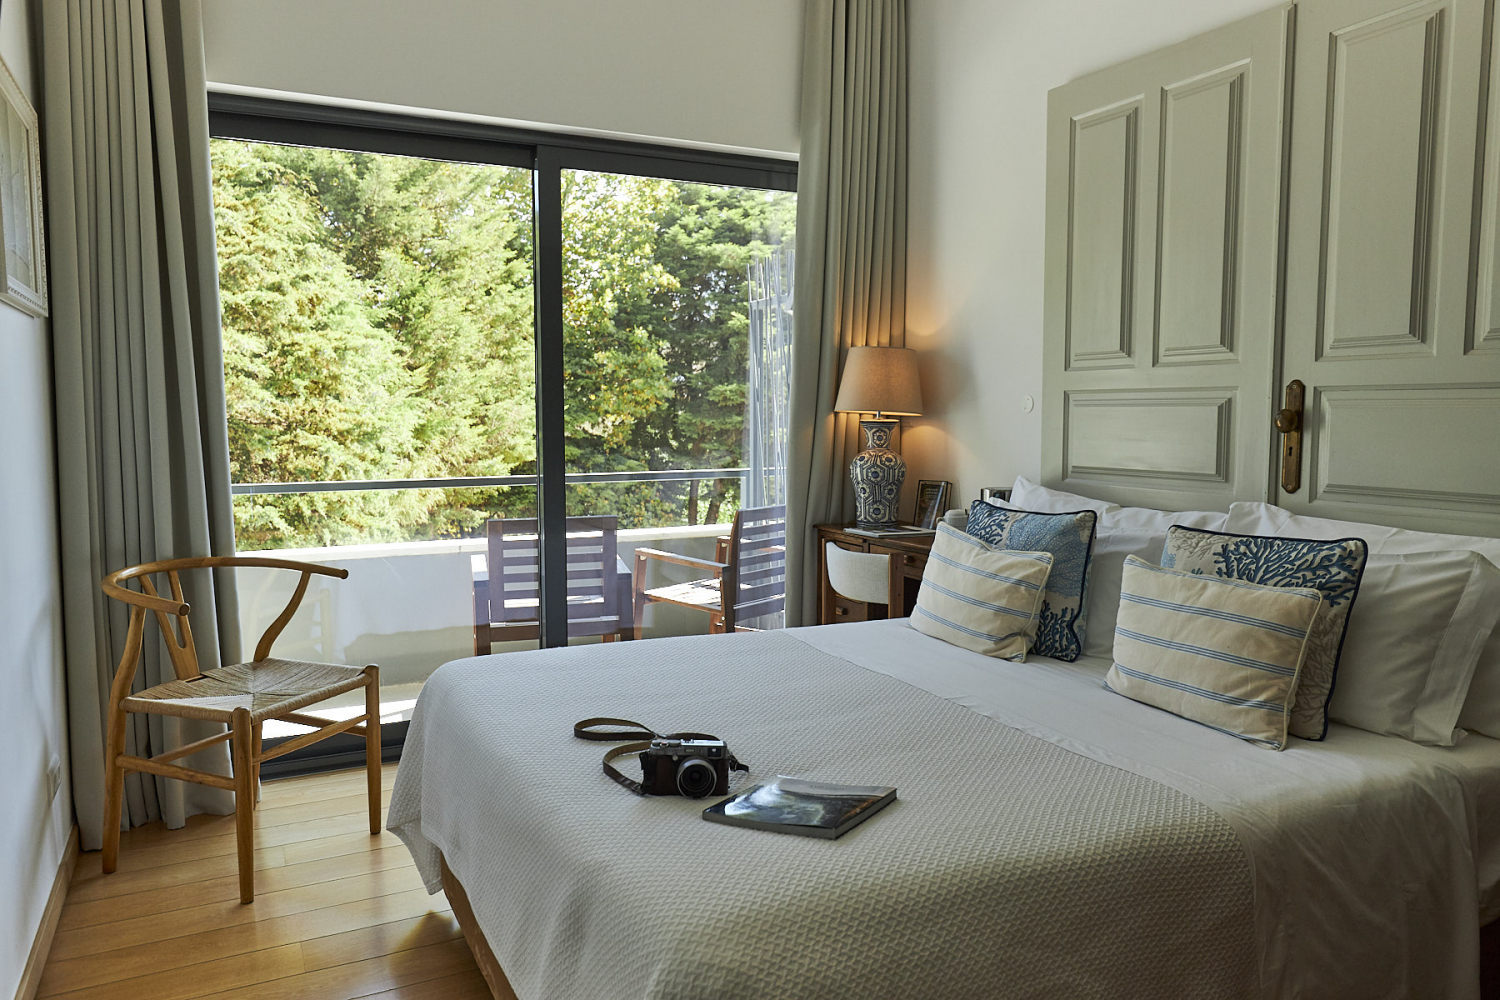 A comfortable room with a double bed and large french doors opening onto a view of lush green trees